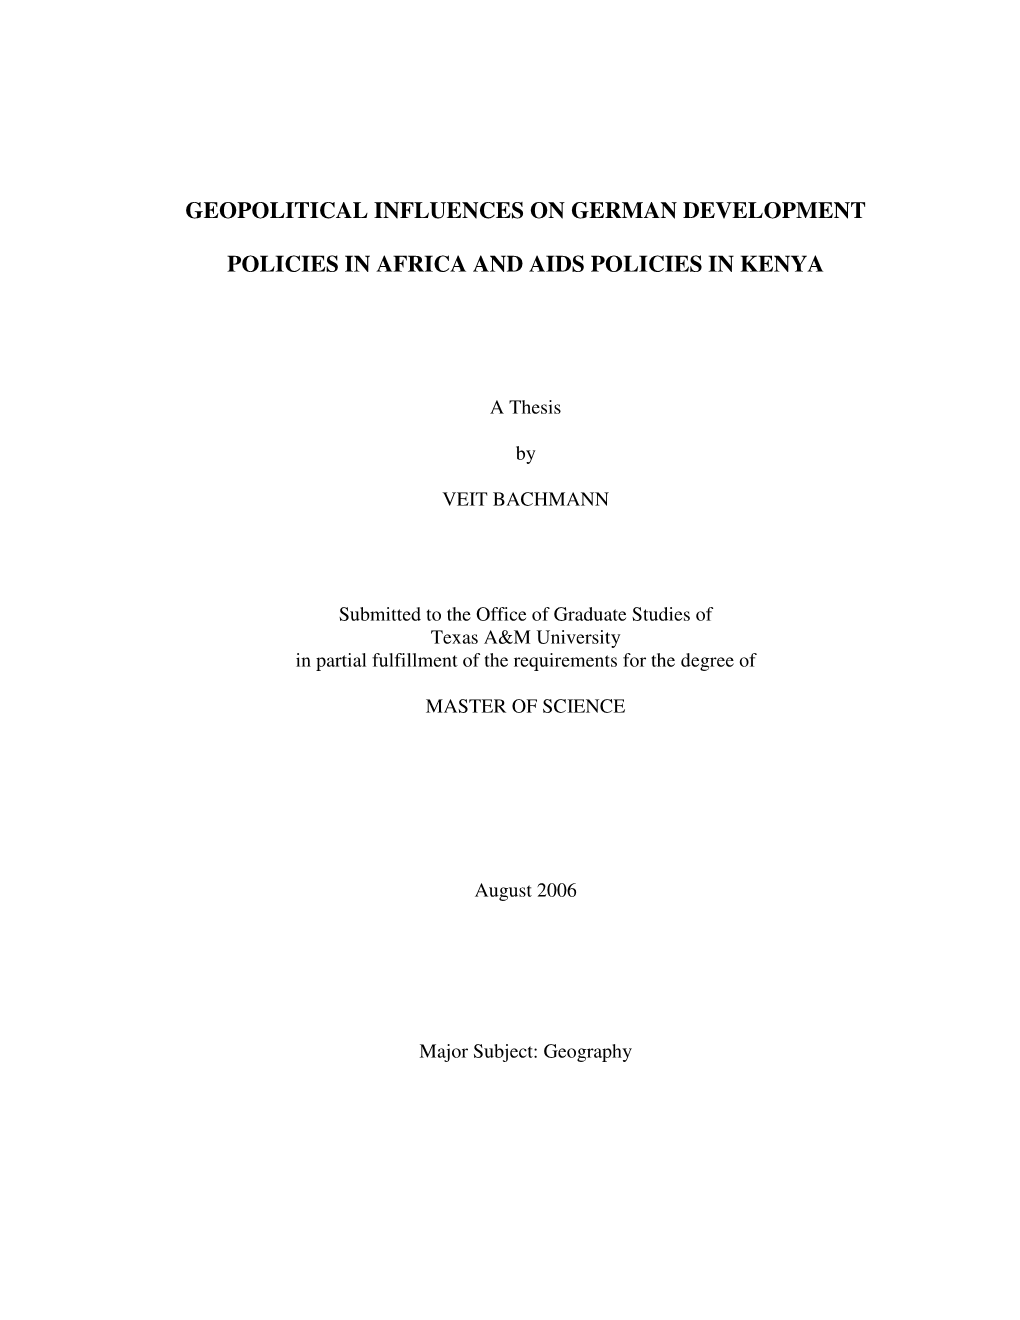 Geopolitical Influences on German Development Policies in Africa and AIDS Policies in Kenya